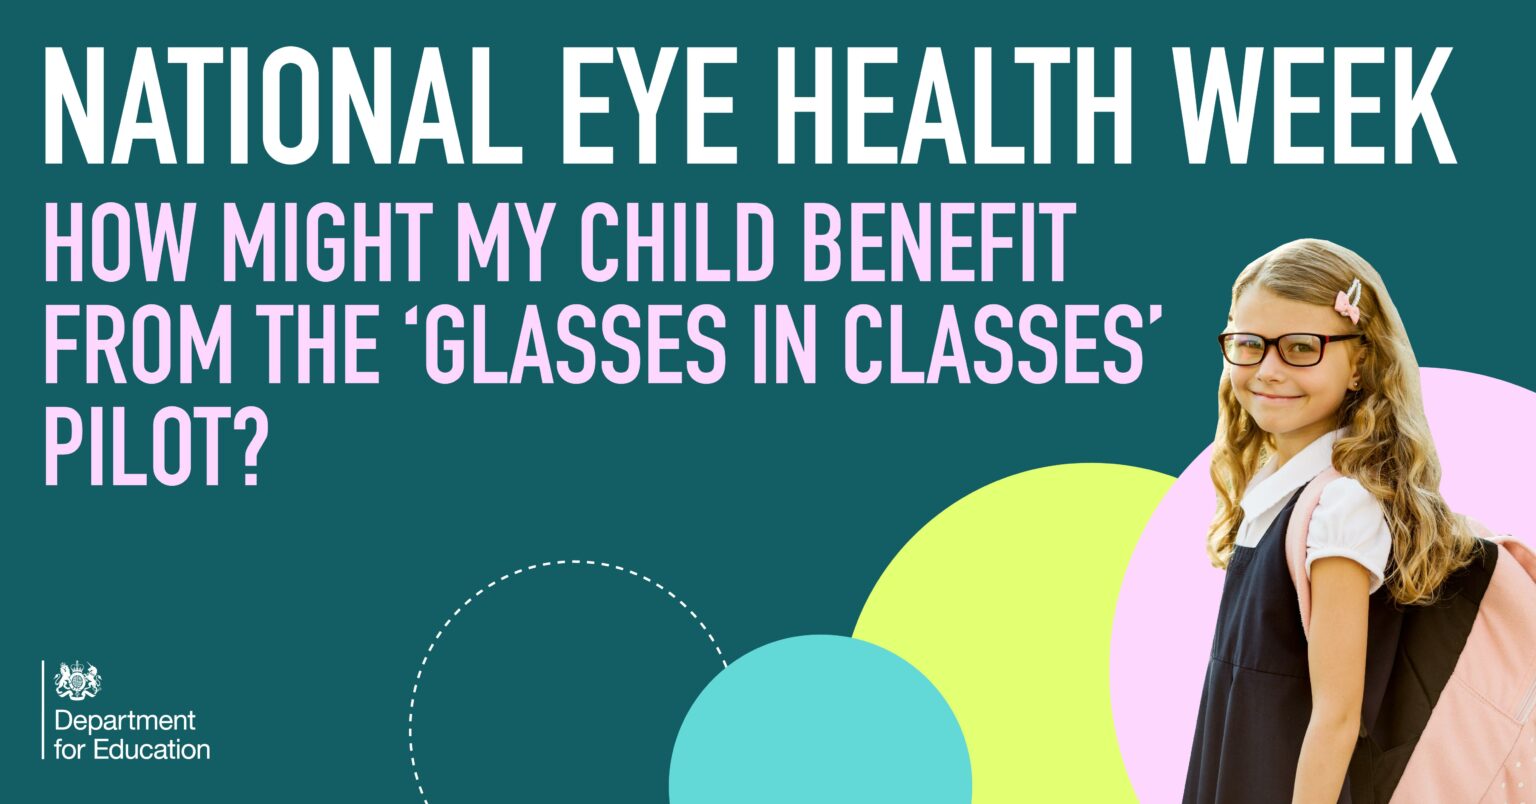 National Eye Health Week How might my child benefit from the ‘Glasses